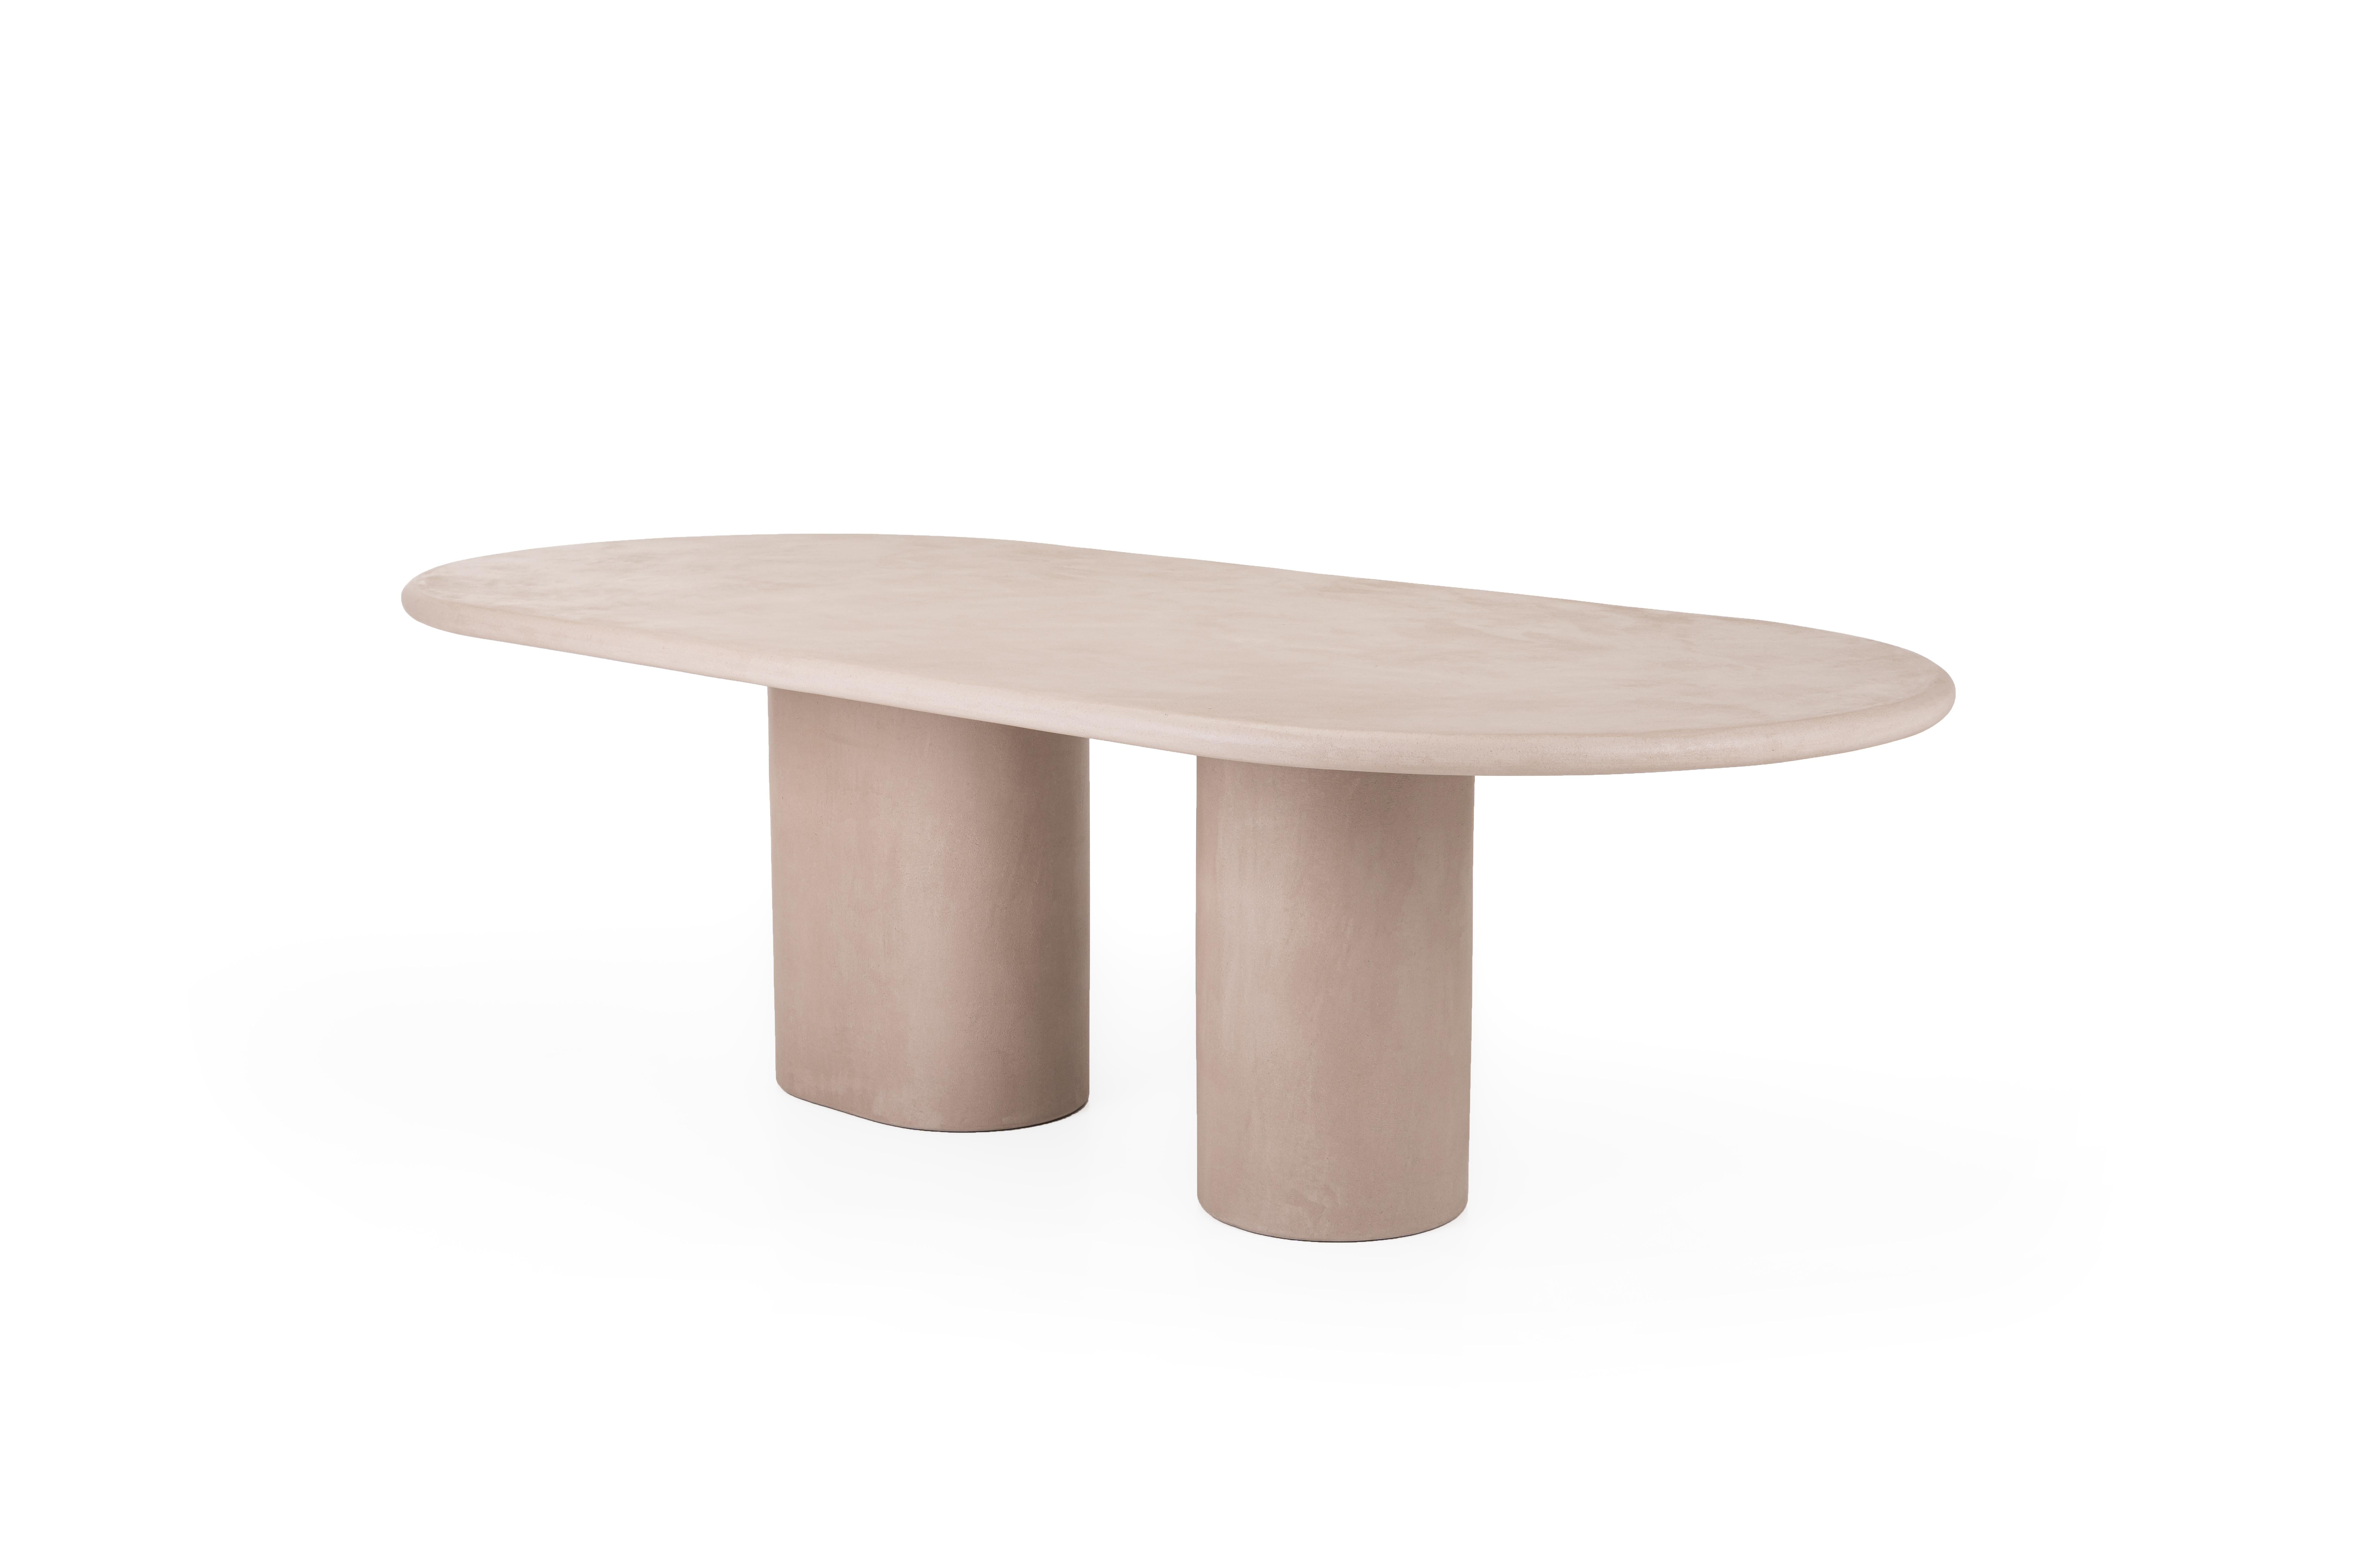 Contemporary Rounded Natural Plaster "Column" Table 280 cm by Isabelle Beaumont